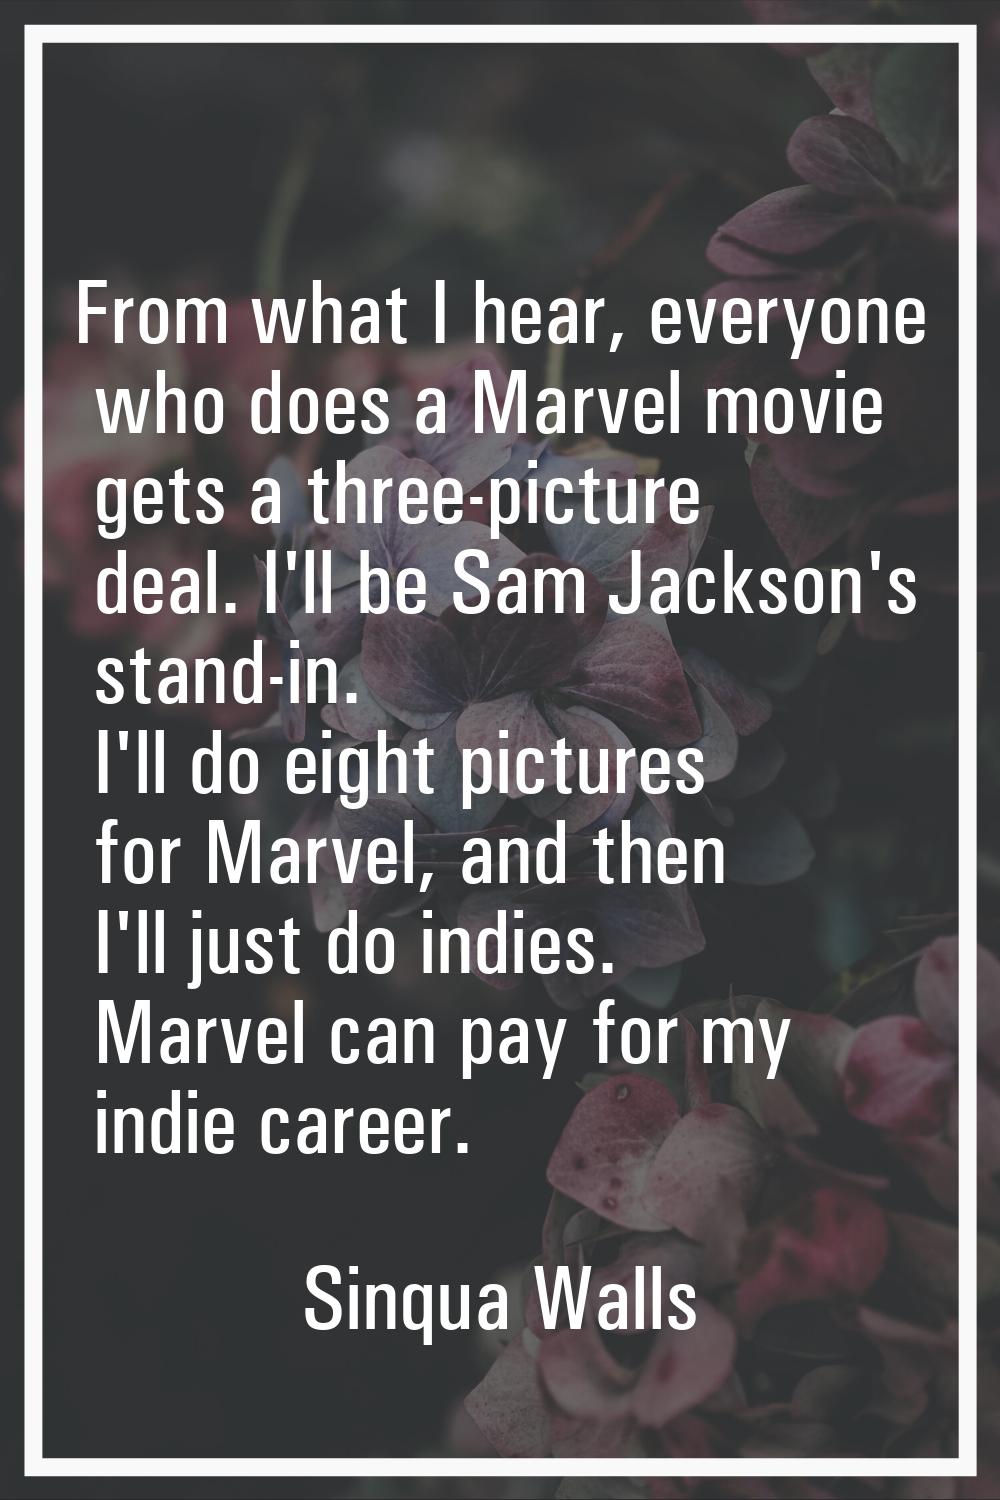 From what I hear, everyone who does a Marvel movie gets a three-picture deal. I'll be Sam Jackson's